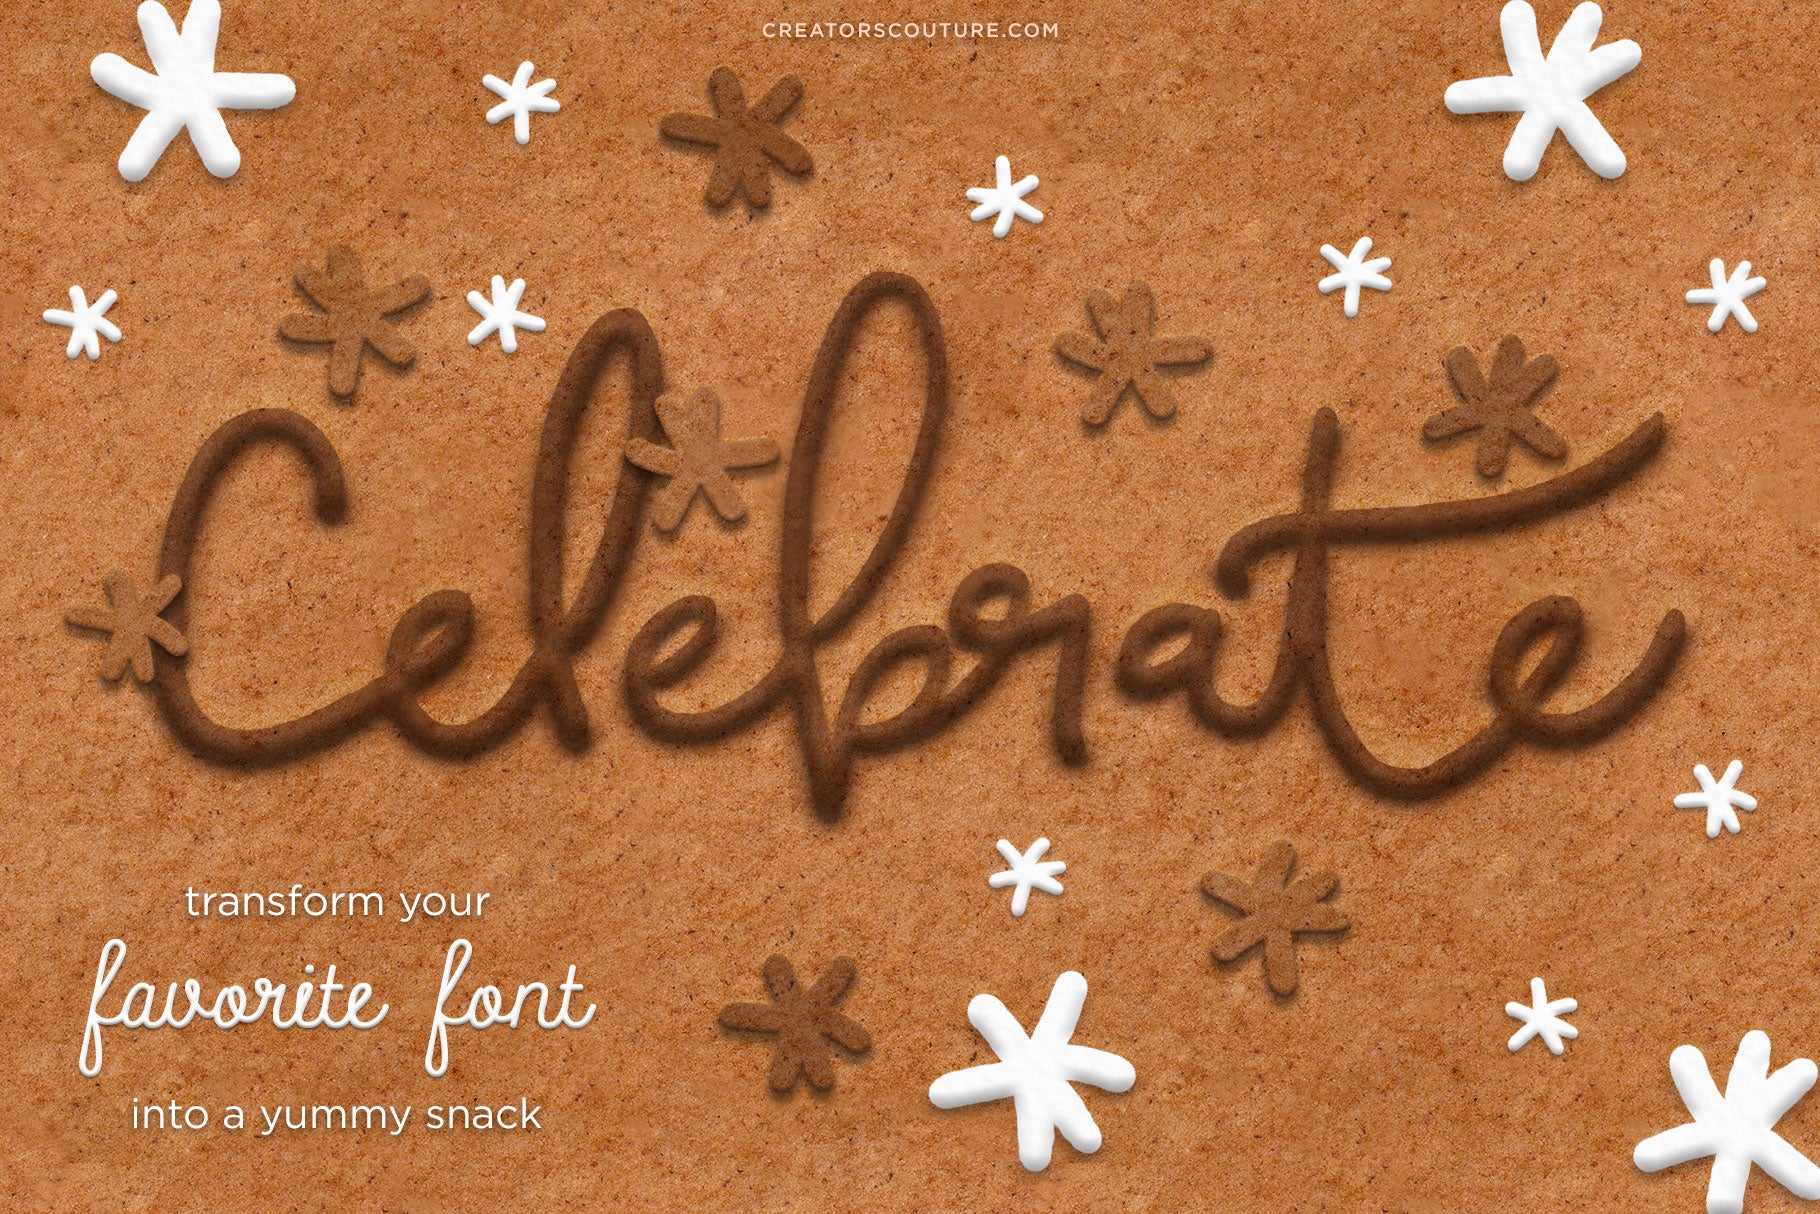 Gingerbread, Cookie, & Cake Graphic & Lettering Effects for Photoshop- Food Typography and cake lettering